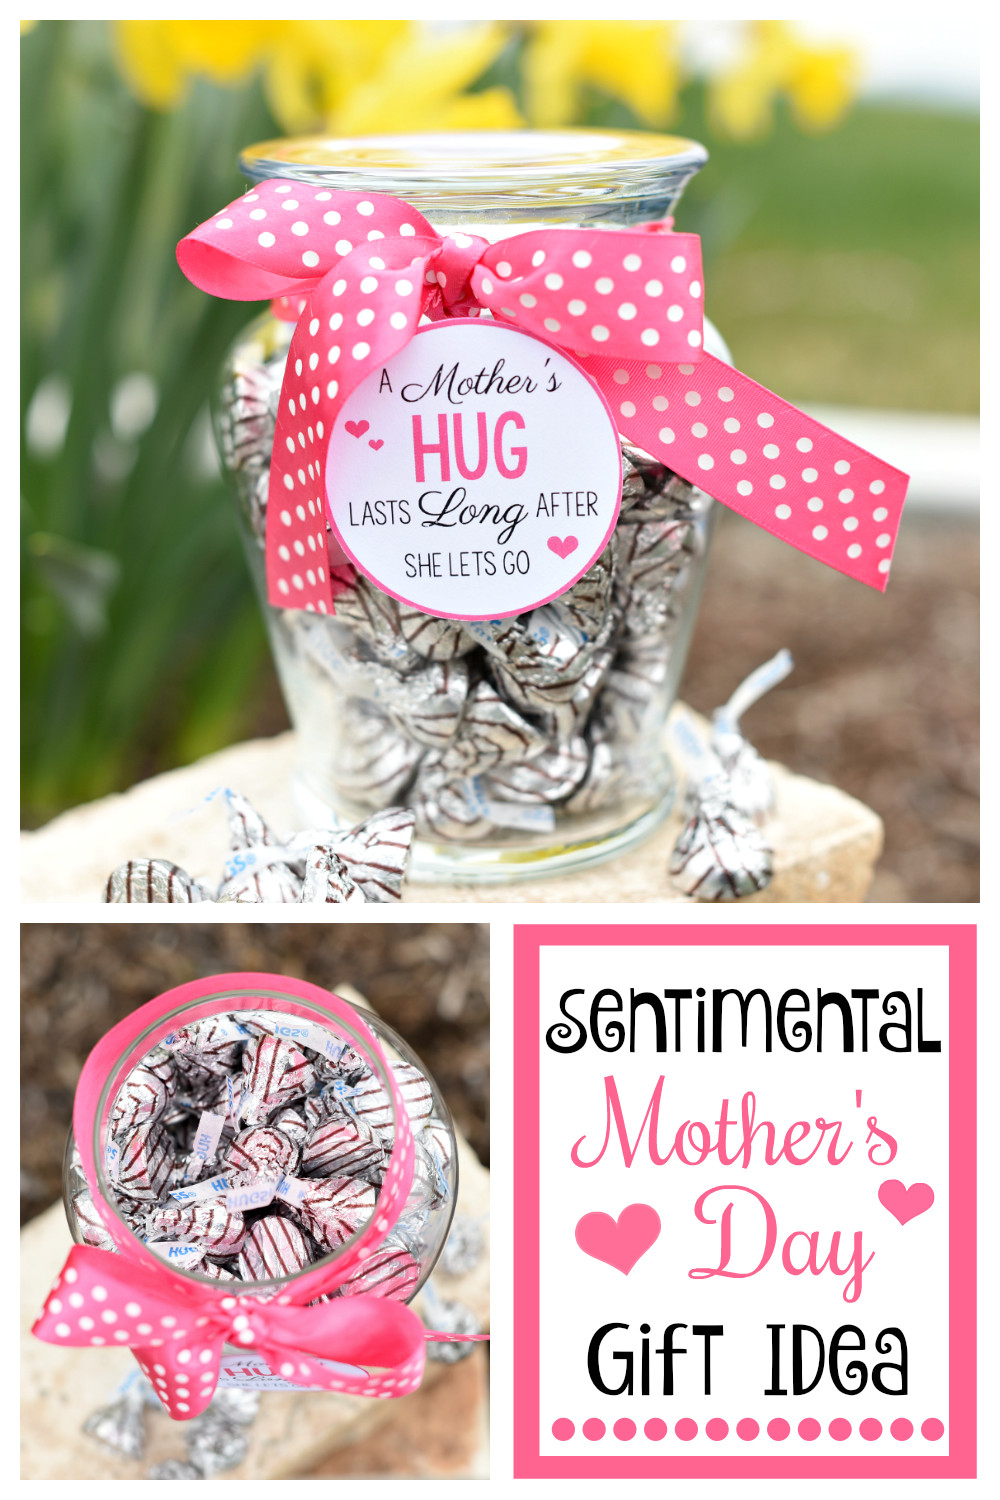 Mothers Day Gift Ideads
 Sentimental Gift Ideas for Mother s Day – Fun Squared